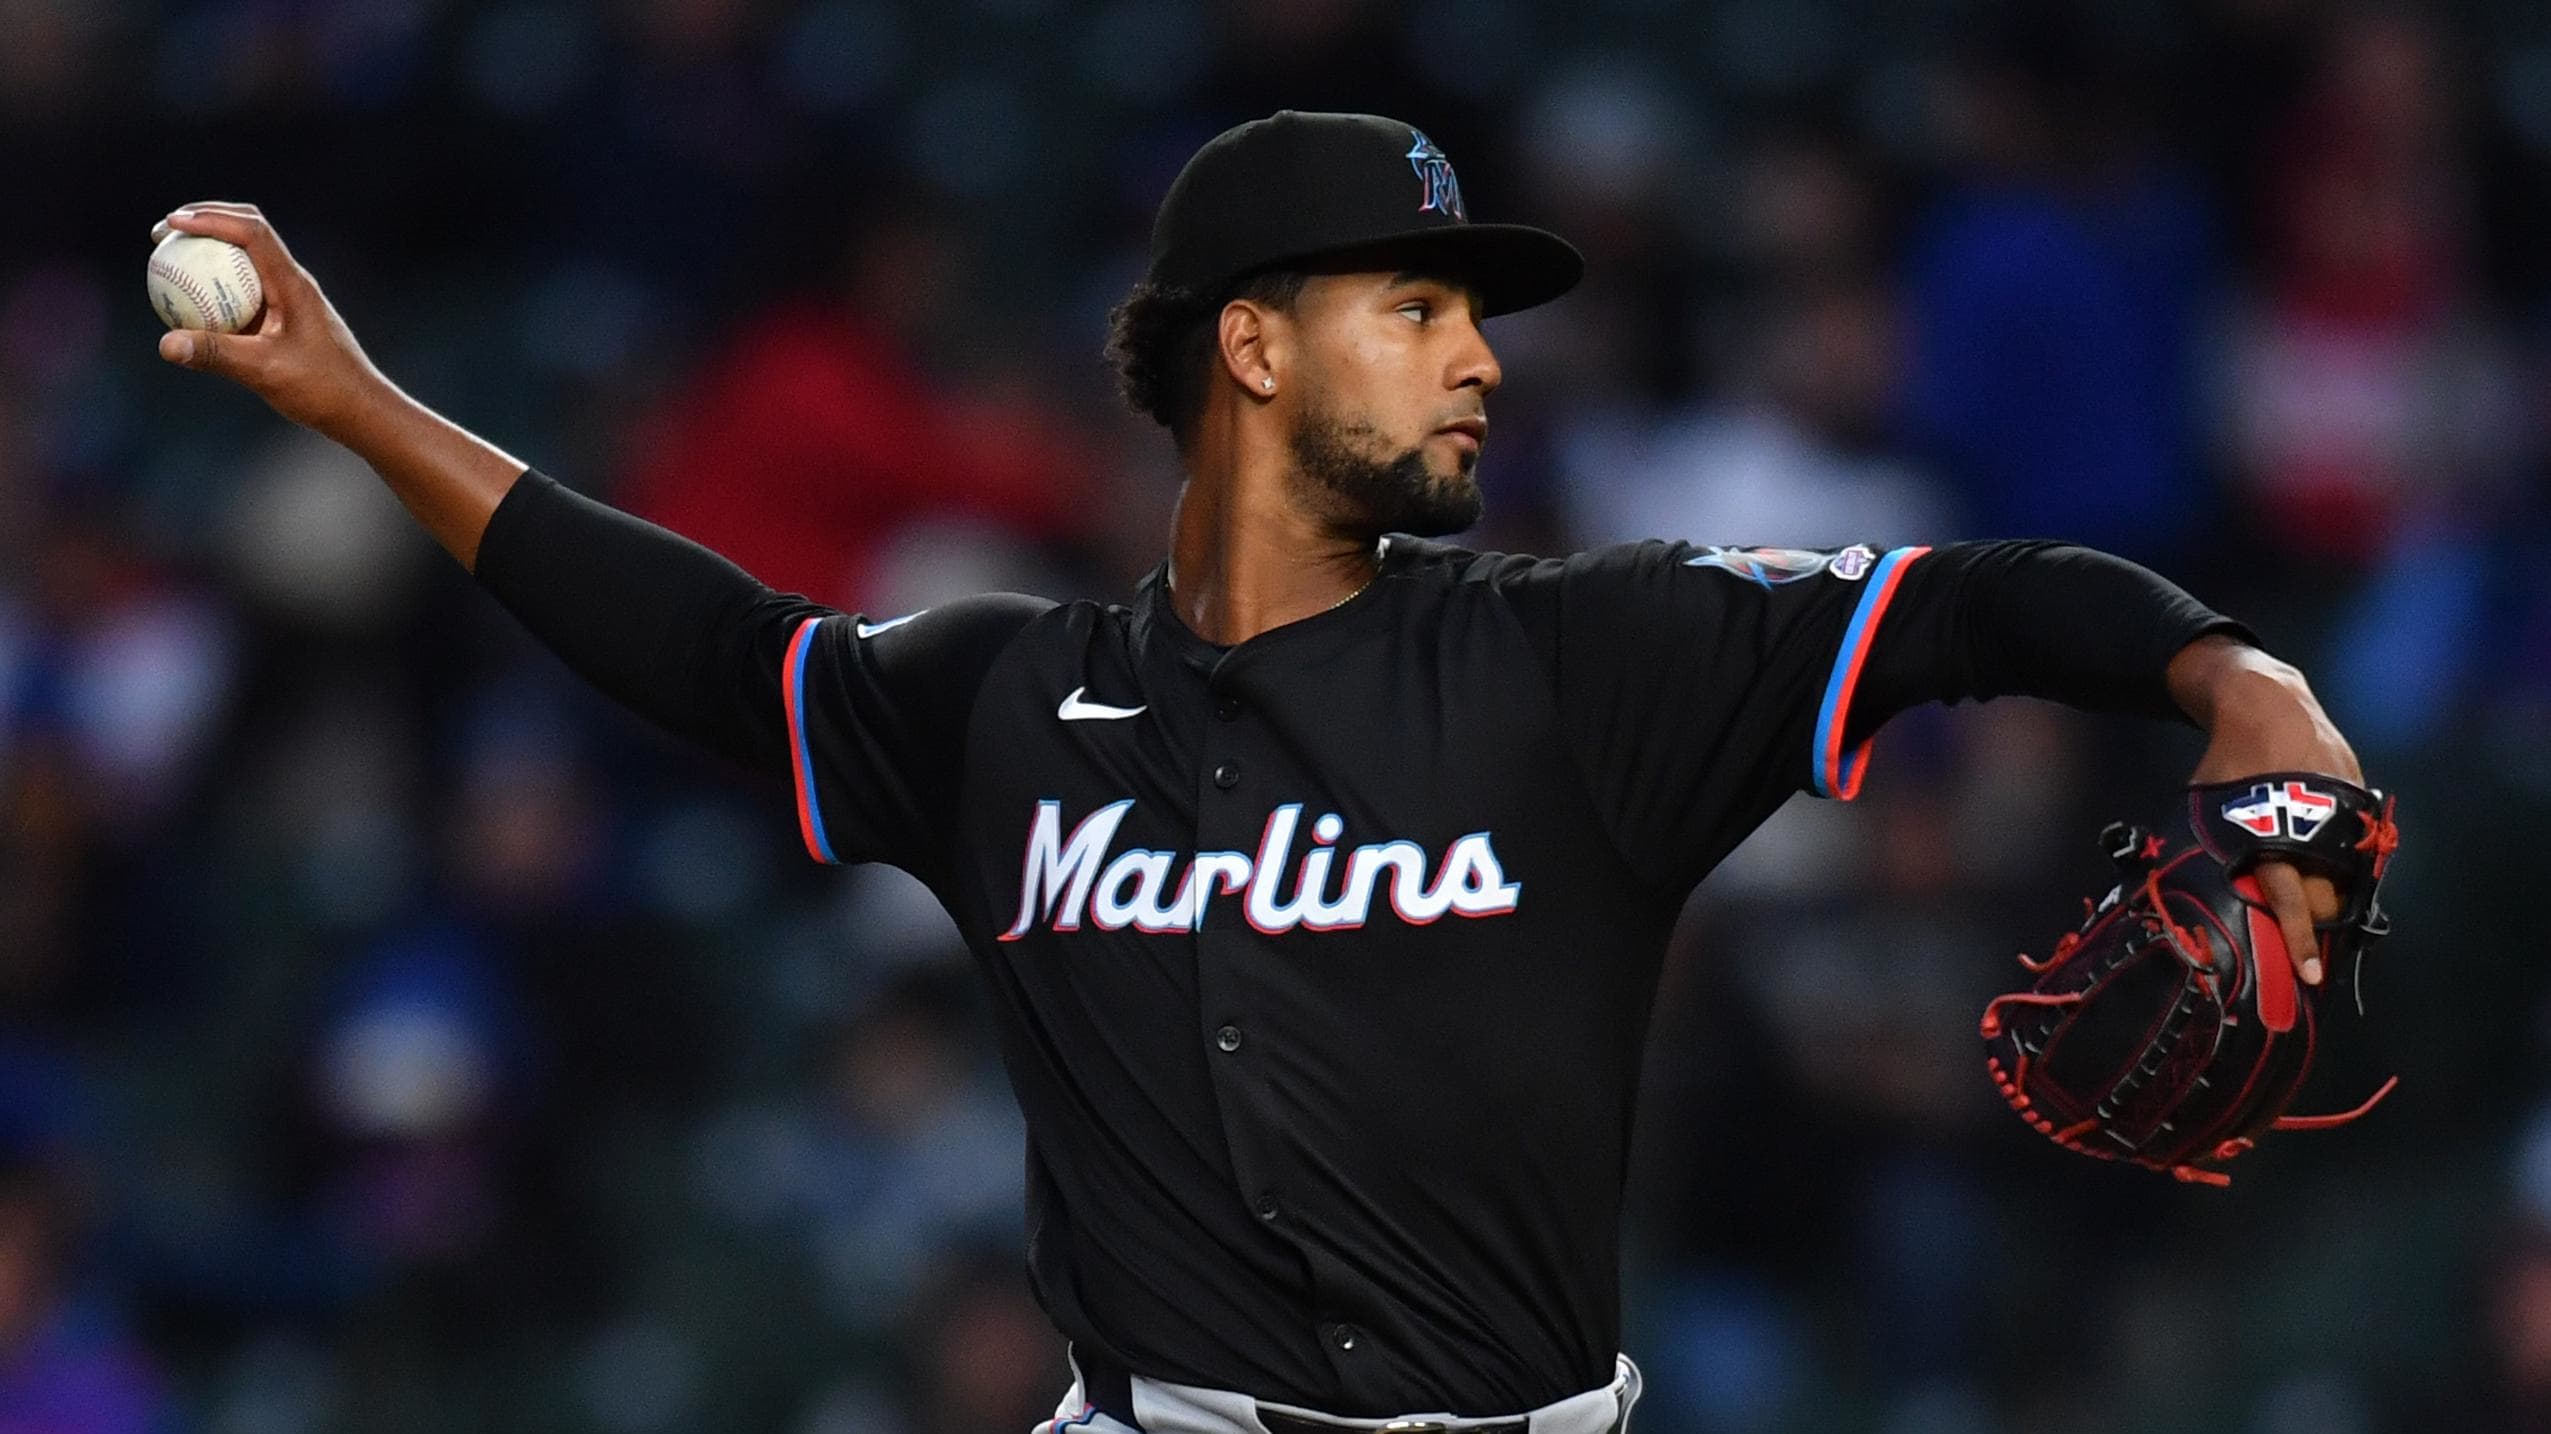 Miami Marlins Attempt to Win Series Early on Wednesday versus Rockies